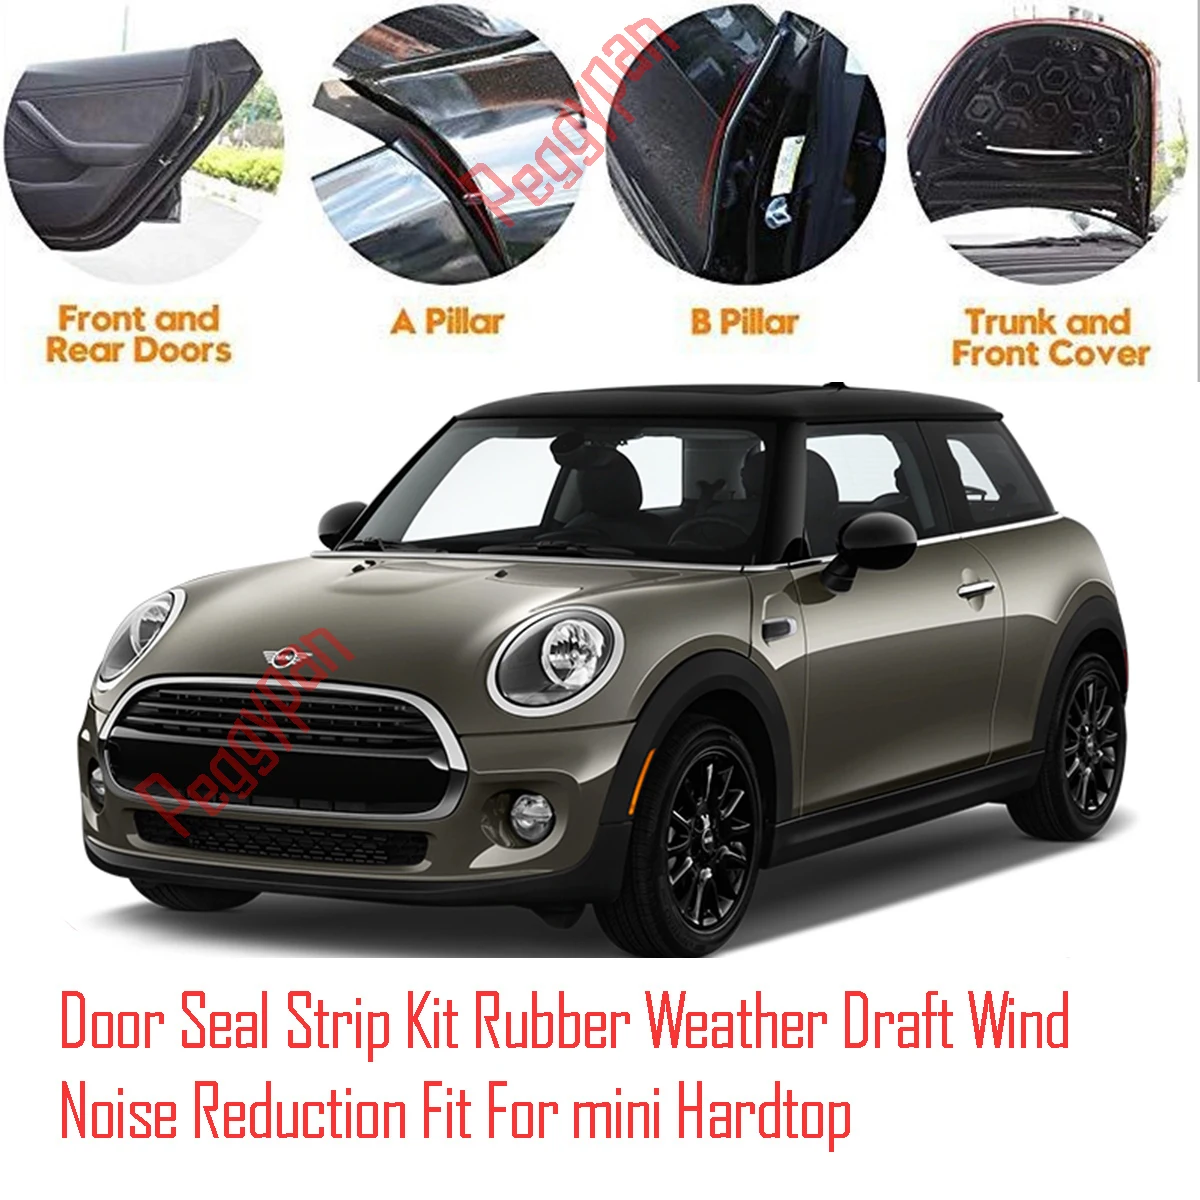 Door Seal Strip Kit Self Adhesive Window Engine Cover Soundproof Rubber Weather Draft Wind Noise Reduction For Mini Hardtop